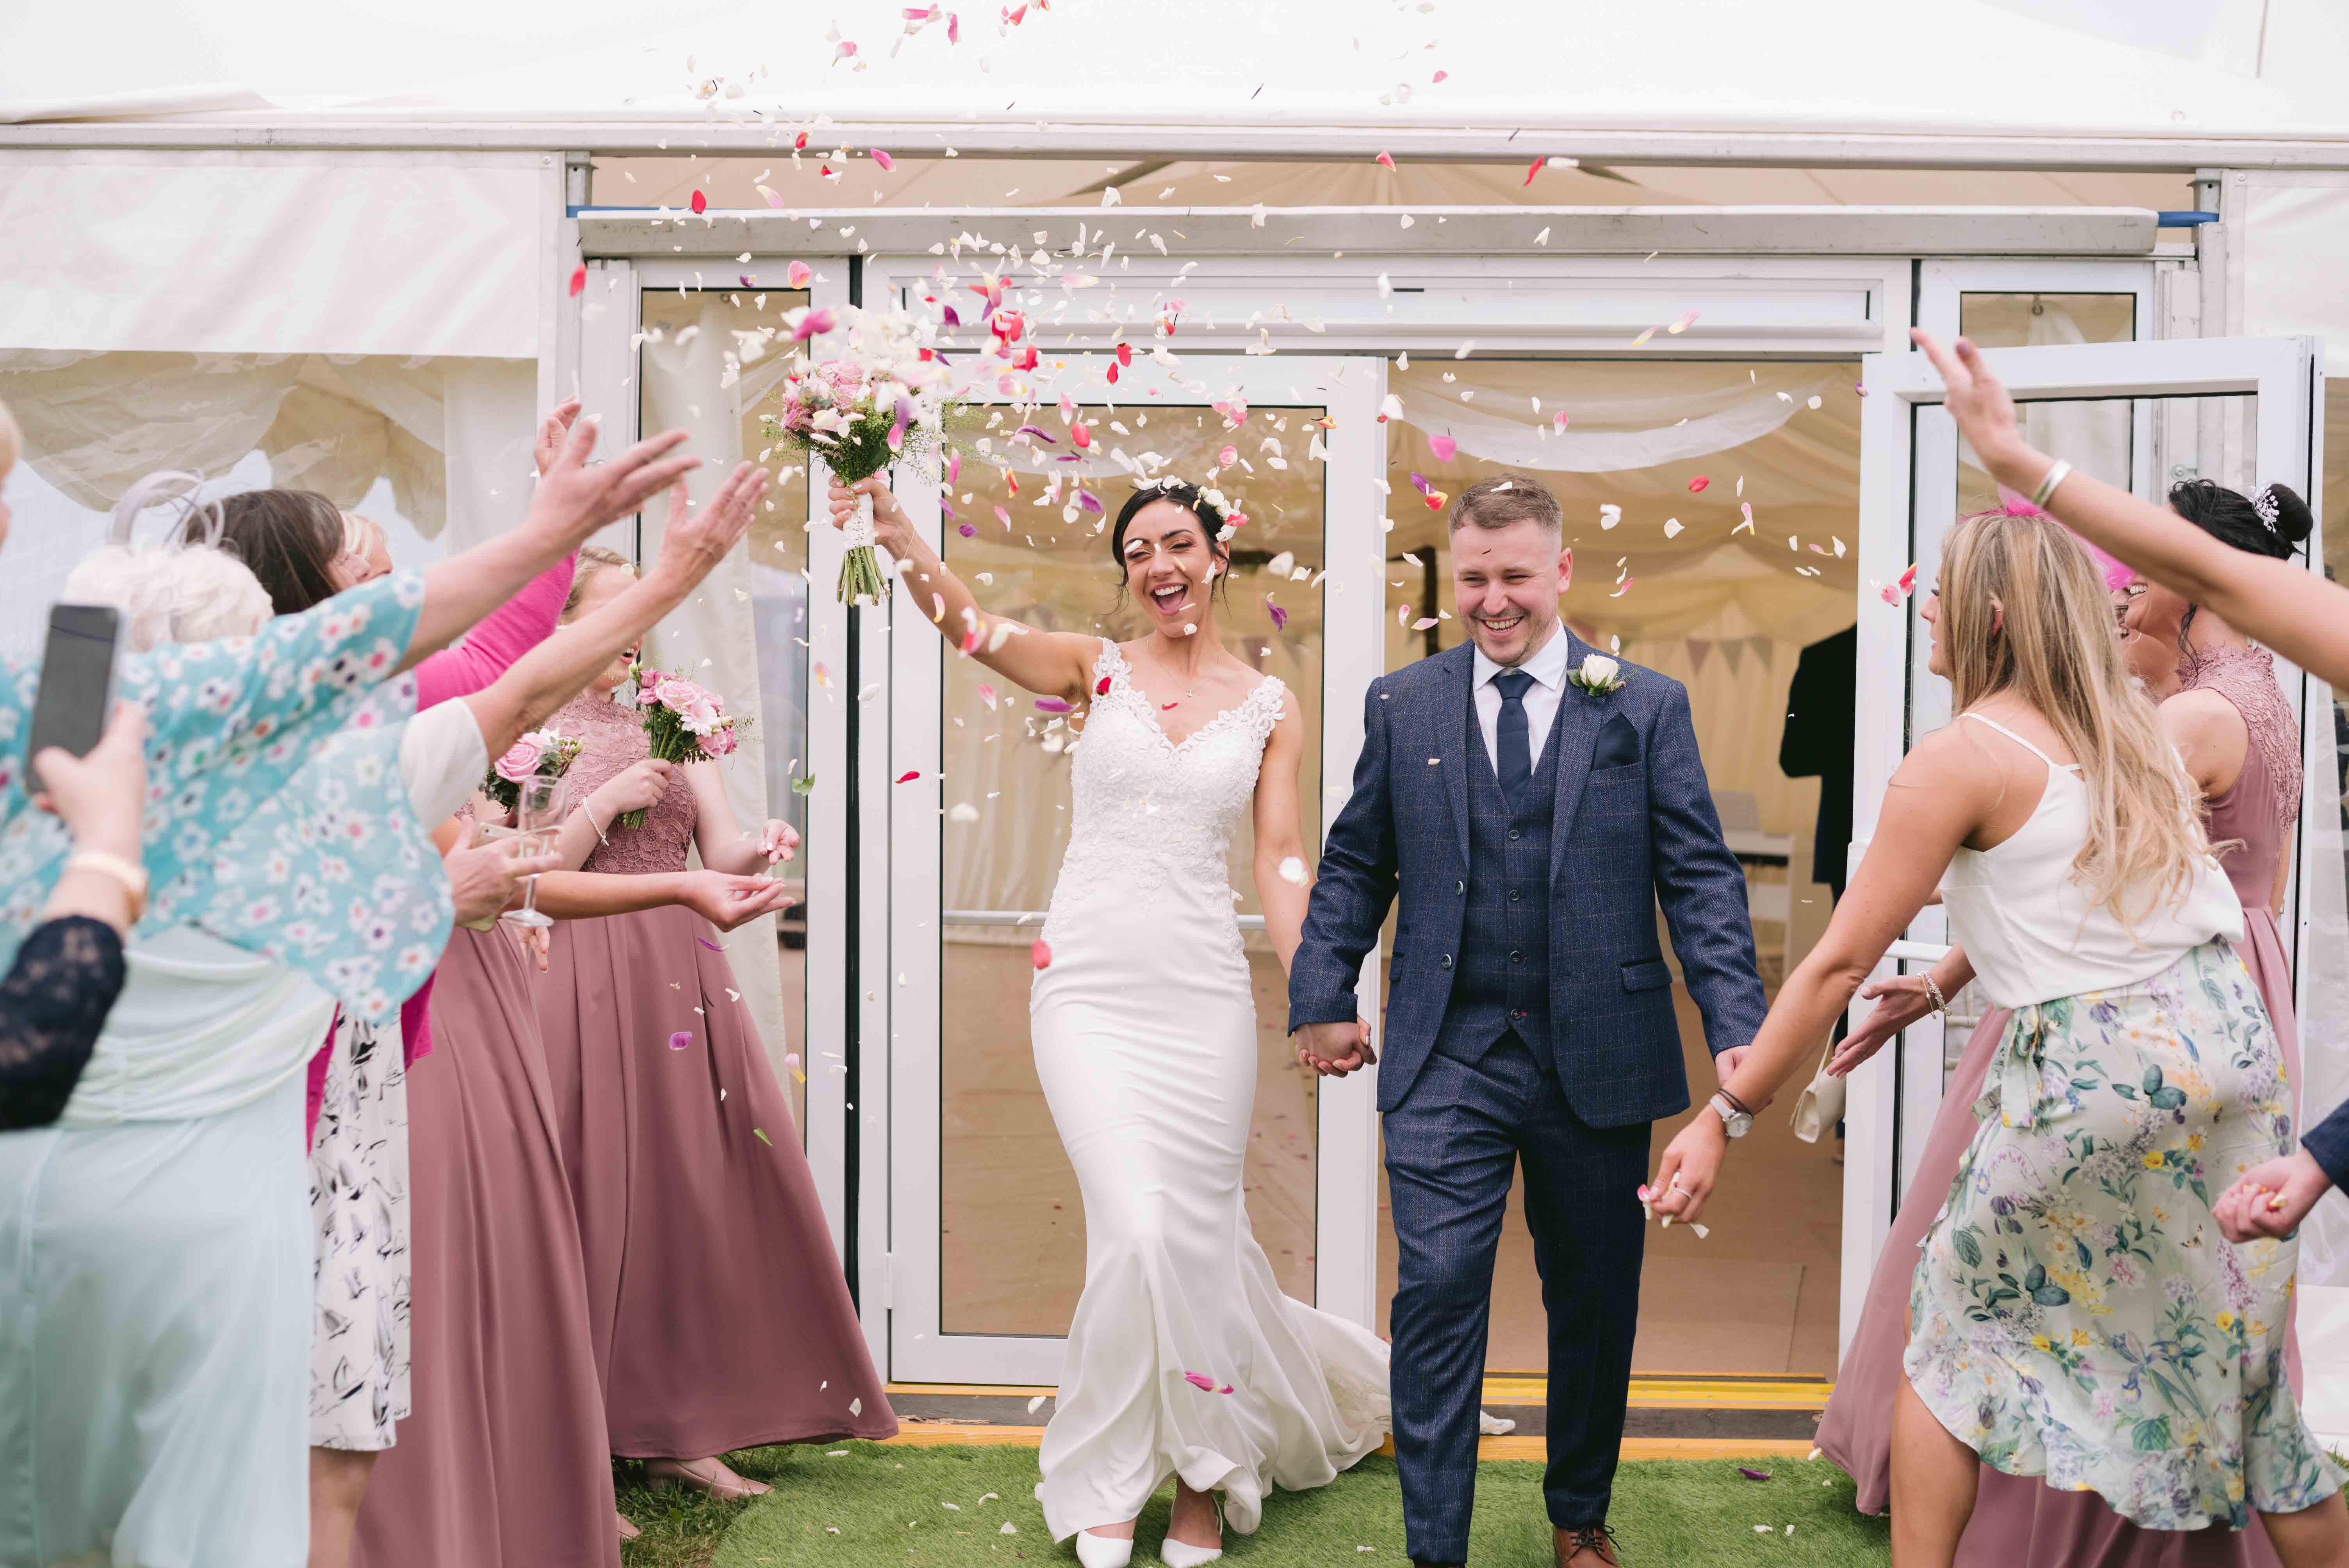 Bride & Groom showered in confetti during a marquee wedding in Flintshire, North Wales